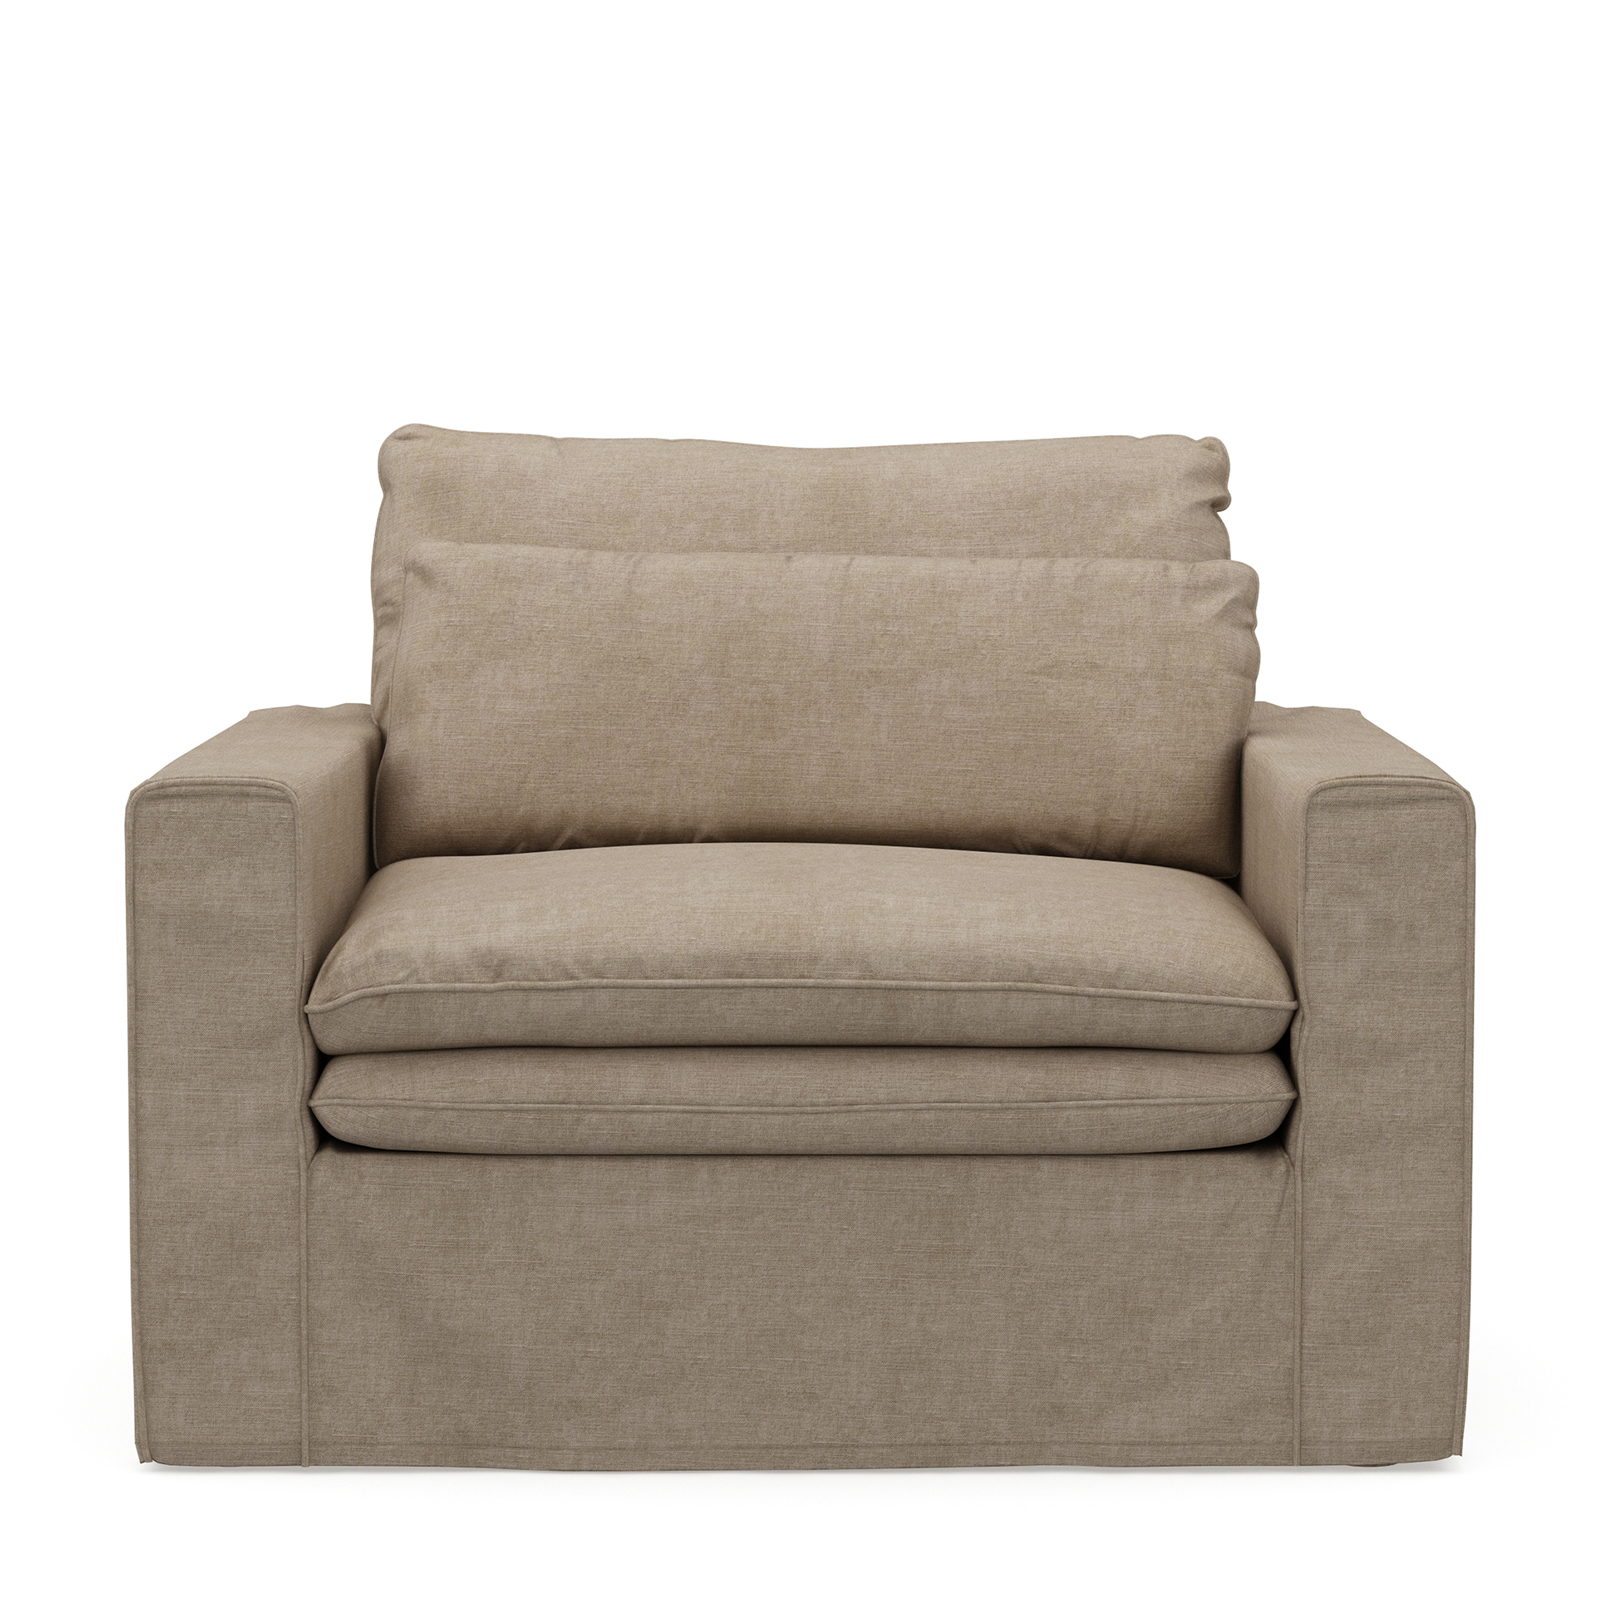 Continental Love Seat, washed cotton, natural